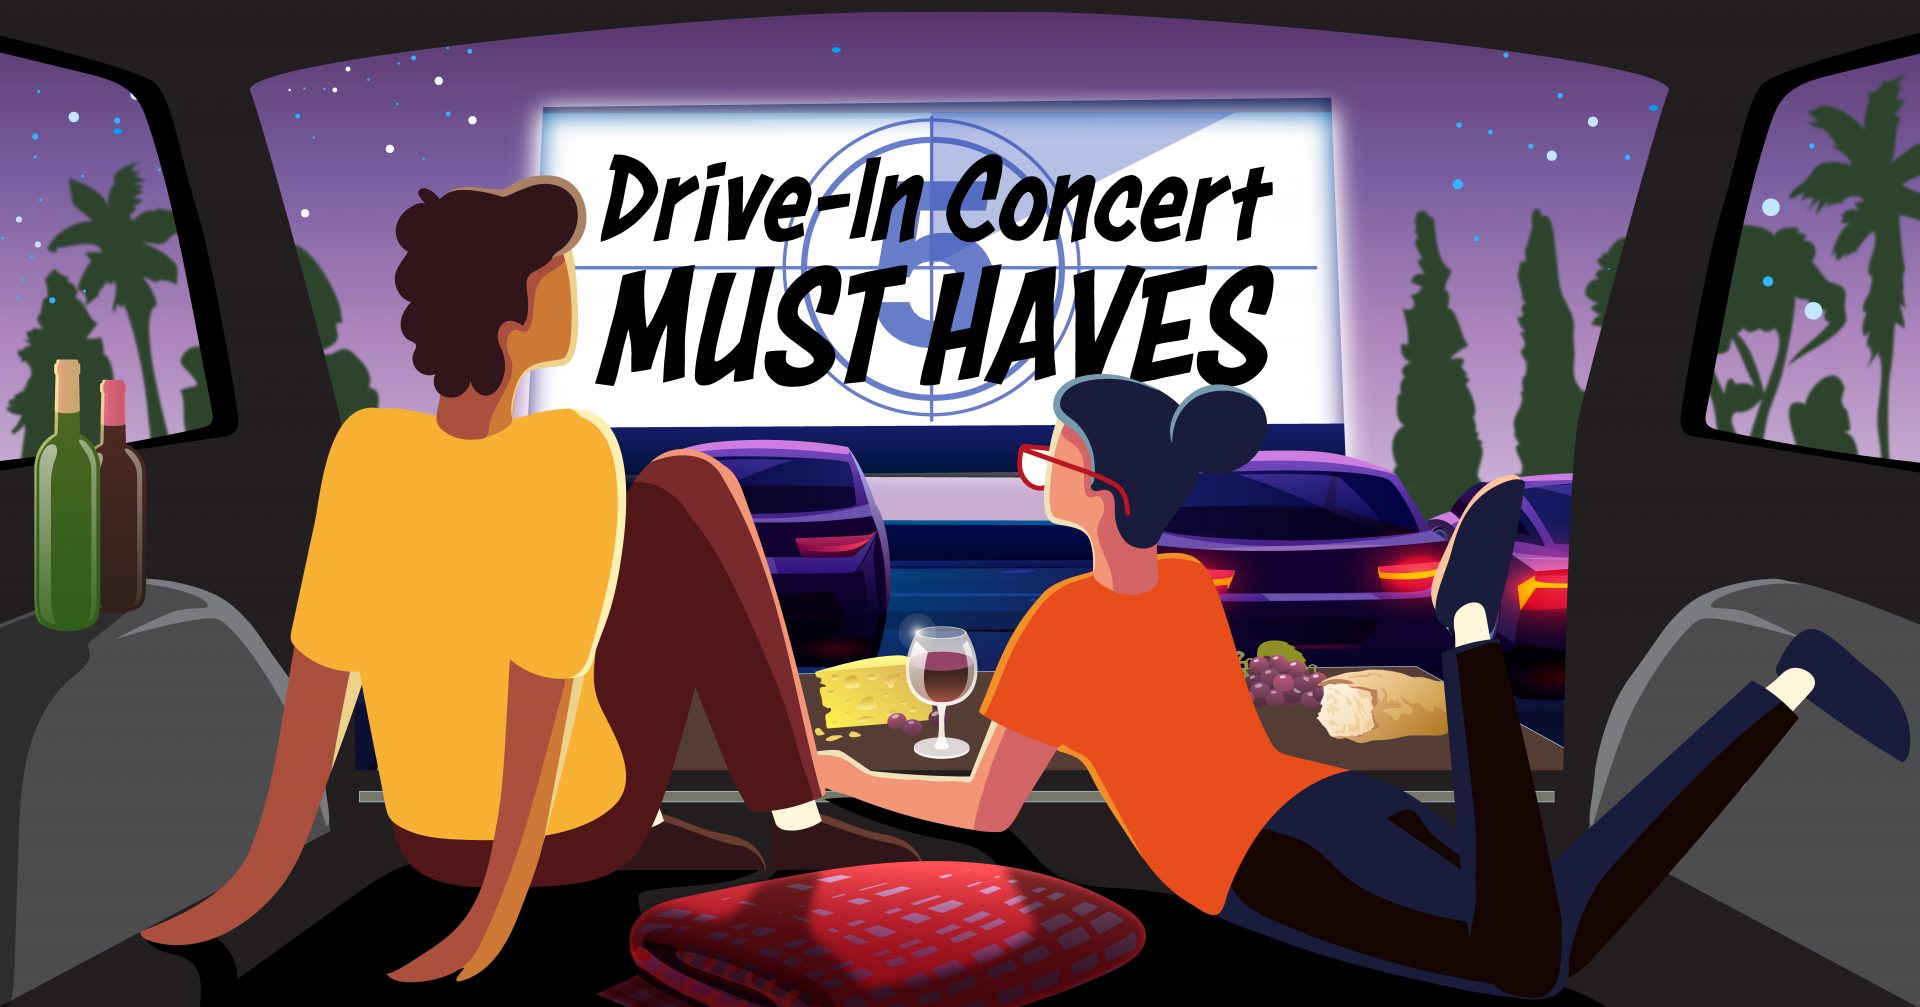 Drive-In Concert Checklist: What to Bring for the Best Experience